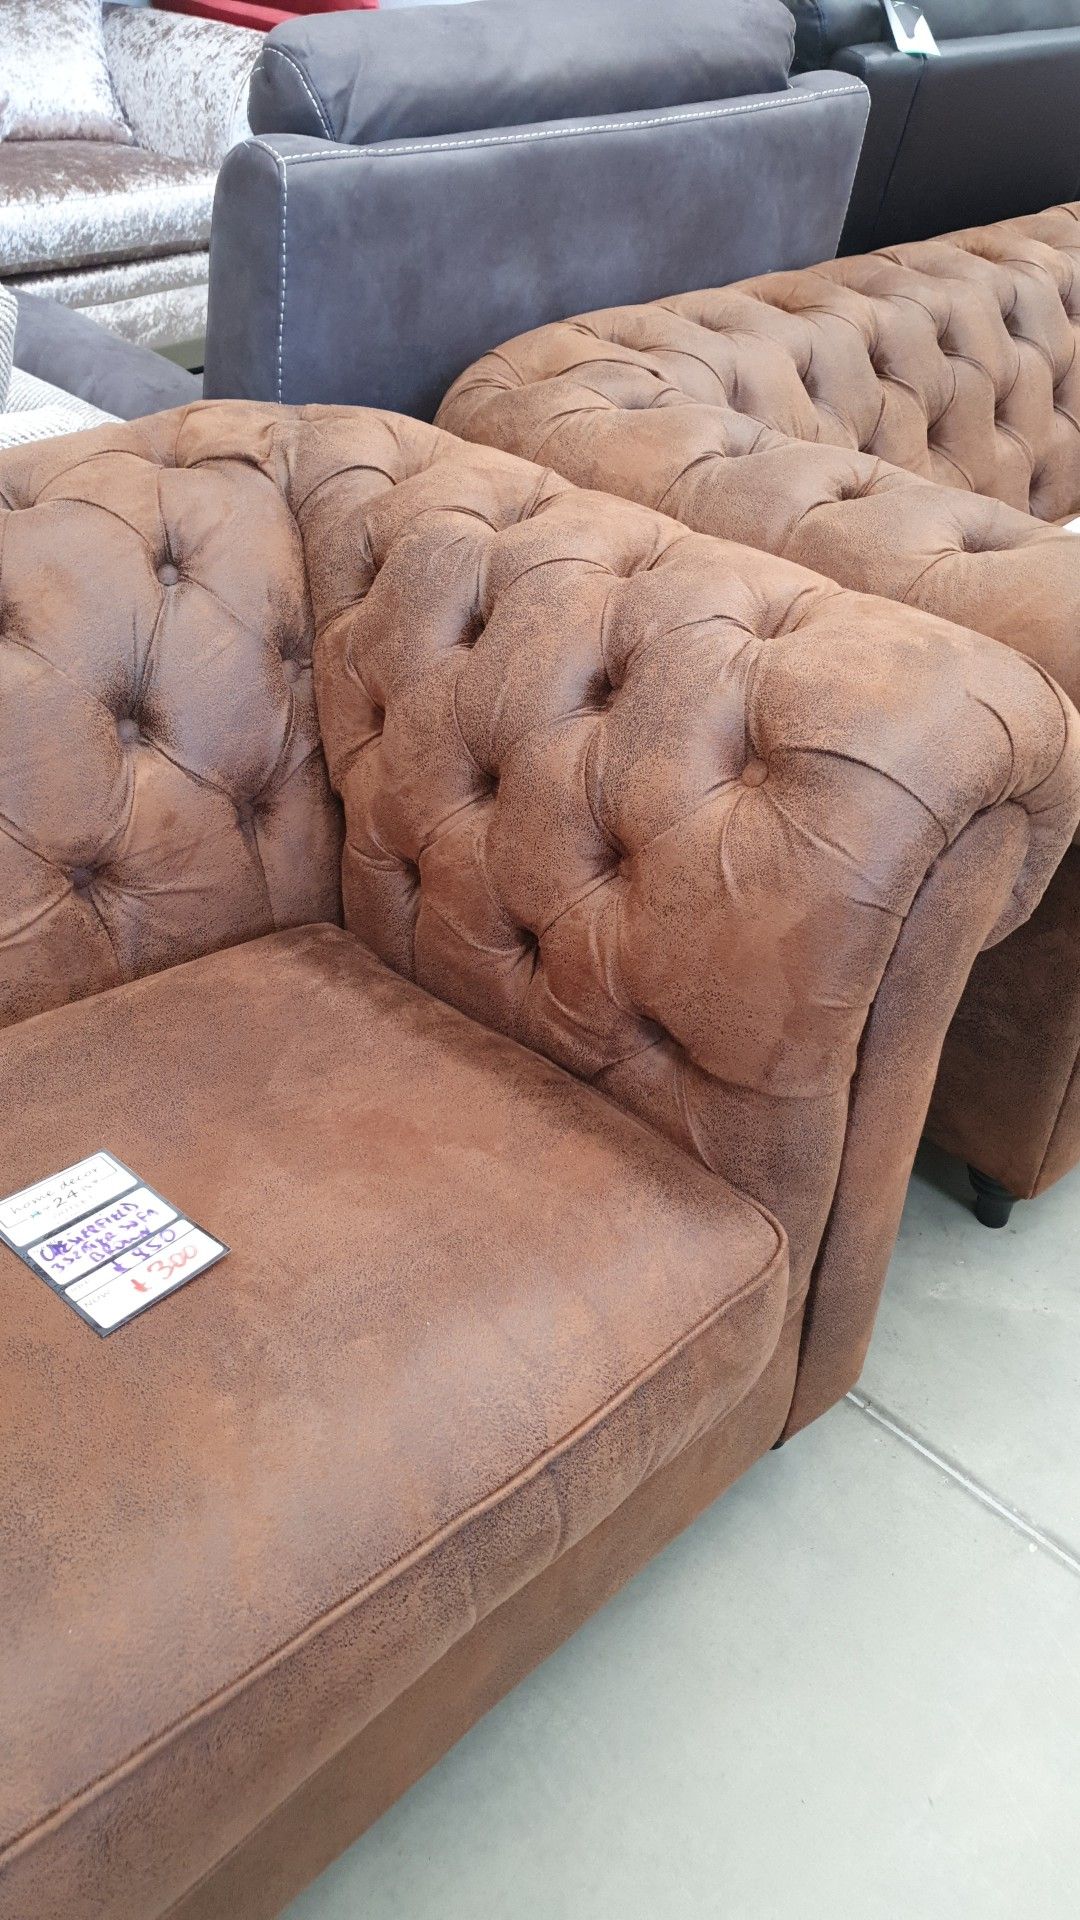 CHESTERFIELD 3 SEATER SOFA BROWN RRP £850 *NO VAT* - Image 2 of 3